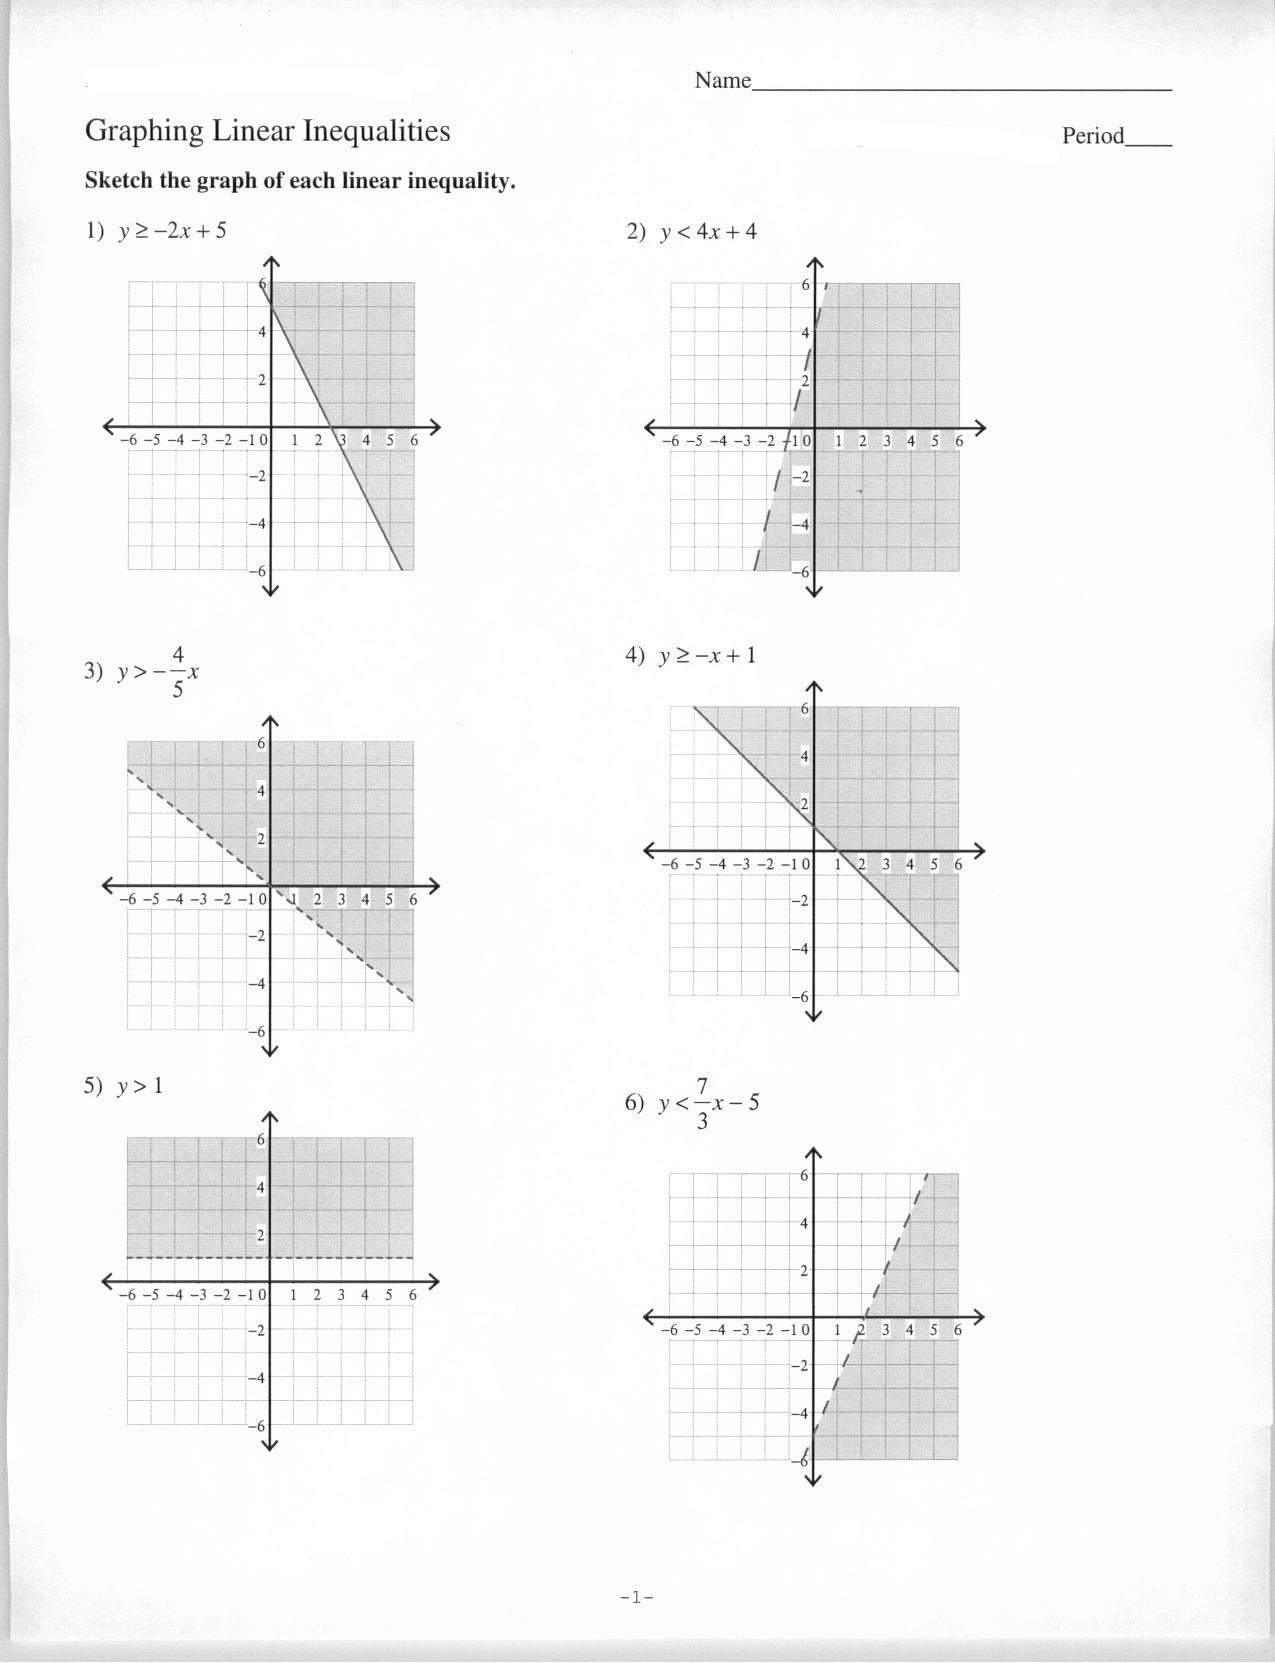 New Solving Linear Inequalities Kuta With Regard To Systems Of Linear Inequalities Worksheet